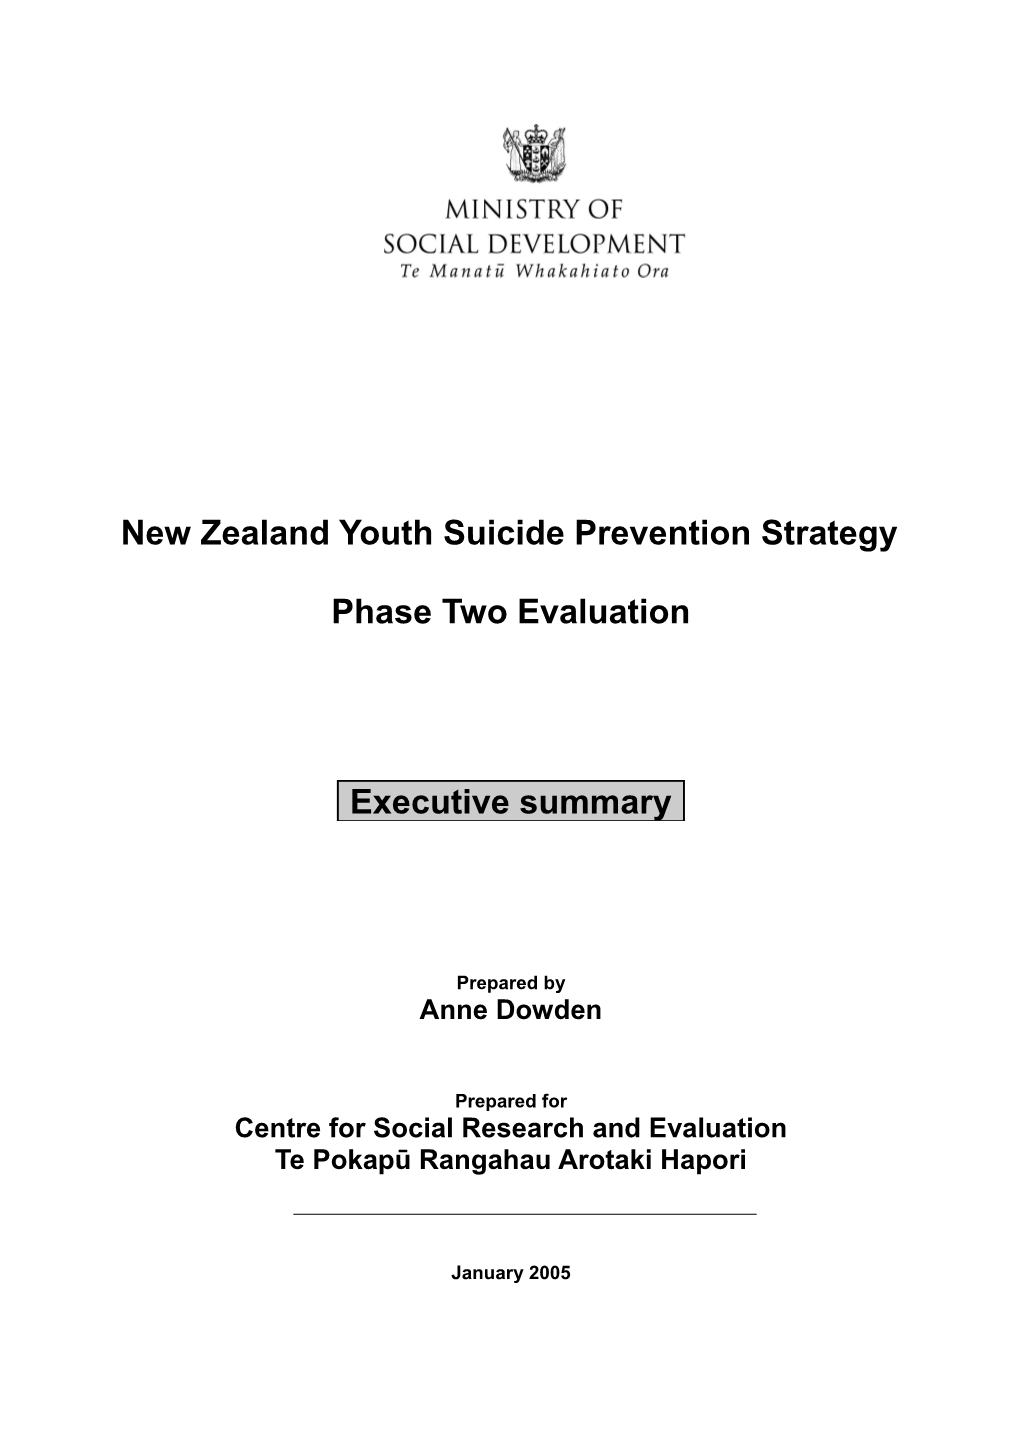 New Zealand Youth Suicide Prevention Strategy